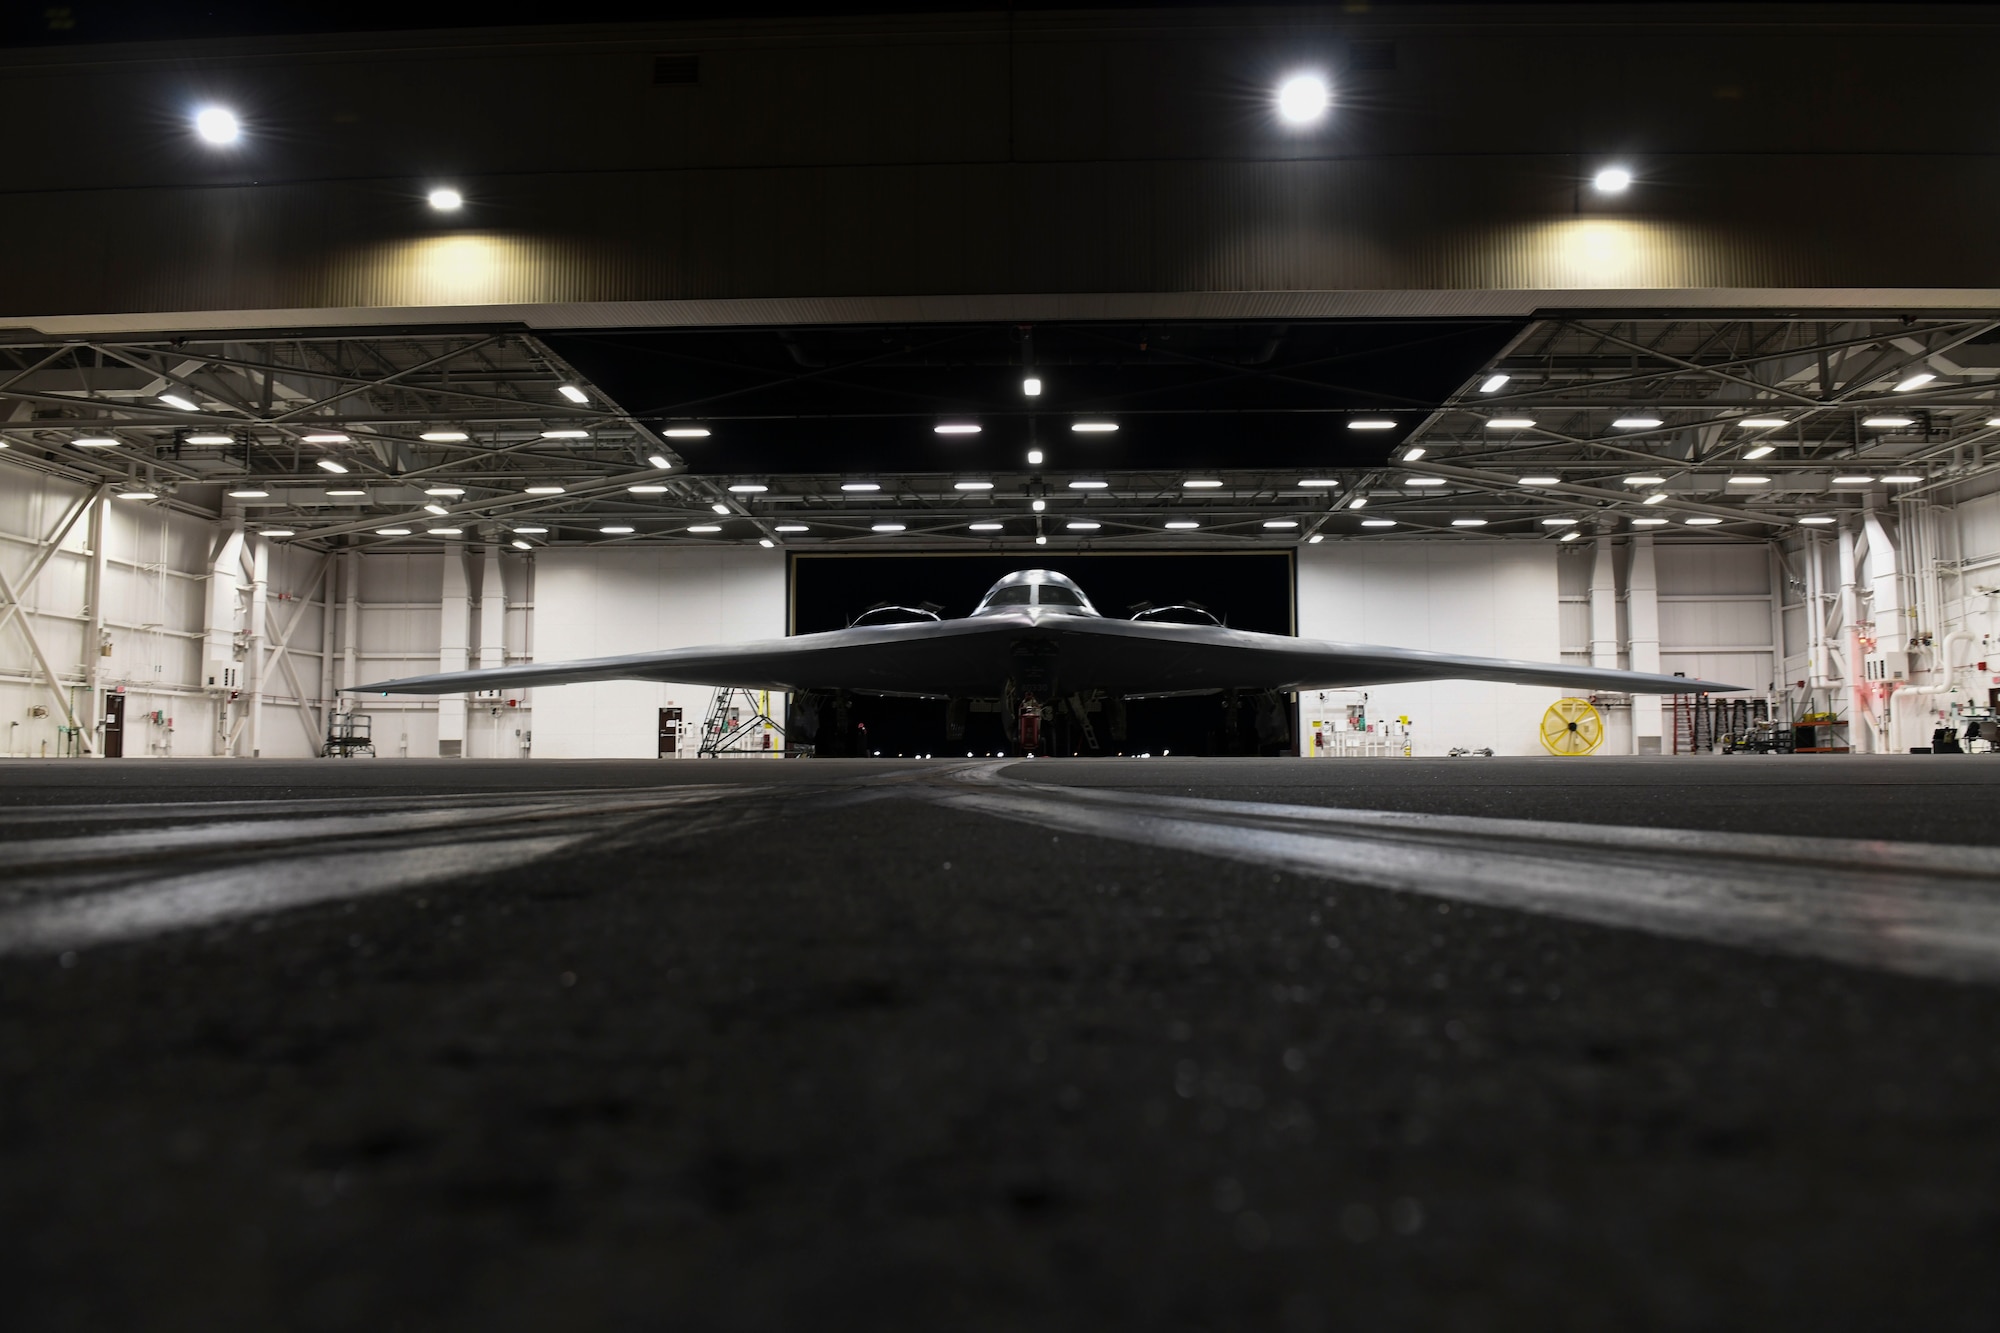 A B-2 Spirit Stealth Bomber, assigned to Whiteman Air Force Base, prepares to support of U.S. Strategic Command strategic presence operations at Whiteman AFB, Missouri, May 7, 2020. U.S. Strategic Command routinely conducts strategic presence operations across the globe as a demonstration of U.S. commitment to collective defense and to integrate with Geographic Combatant Command operations and activities. These missions also familiarize aircrews with air bases, procedures, and operations in different Geographic Combatant Commands areas of operations.